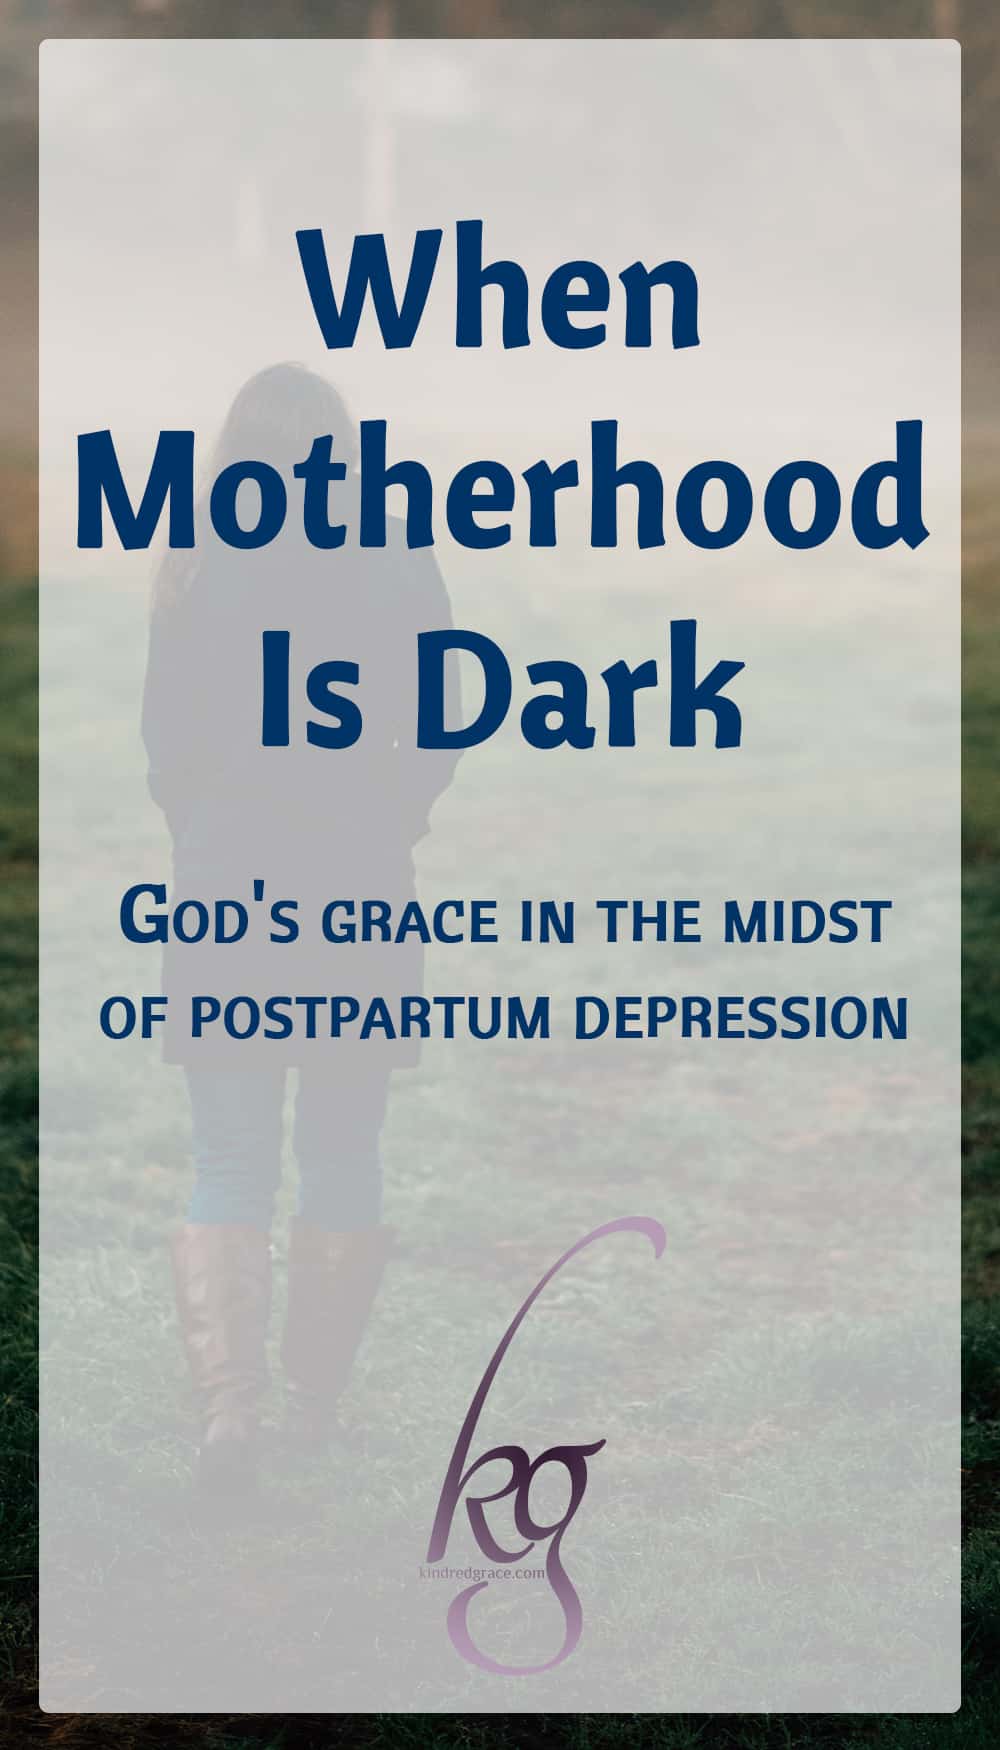 I had a beautiful, perfectly healthy baby and easy physical recovery, so I “should” have felt on top of the world! Instead, I was crying every day, furious with my husband and three-year-old daughter over literally nothing, and felt like I was completely alone in a black cave. via @KindredGrace